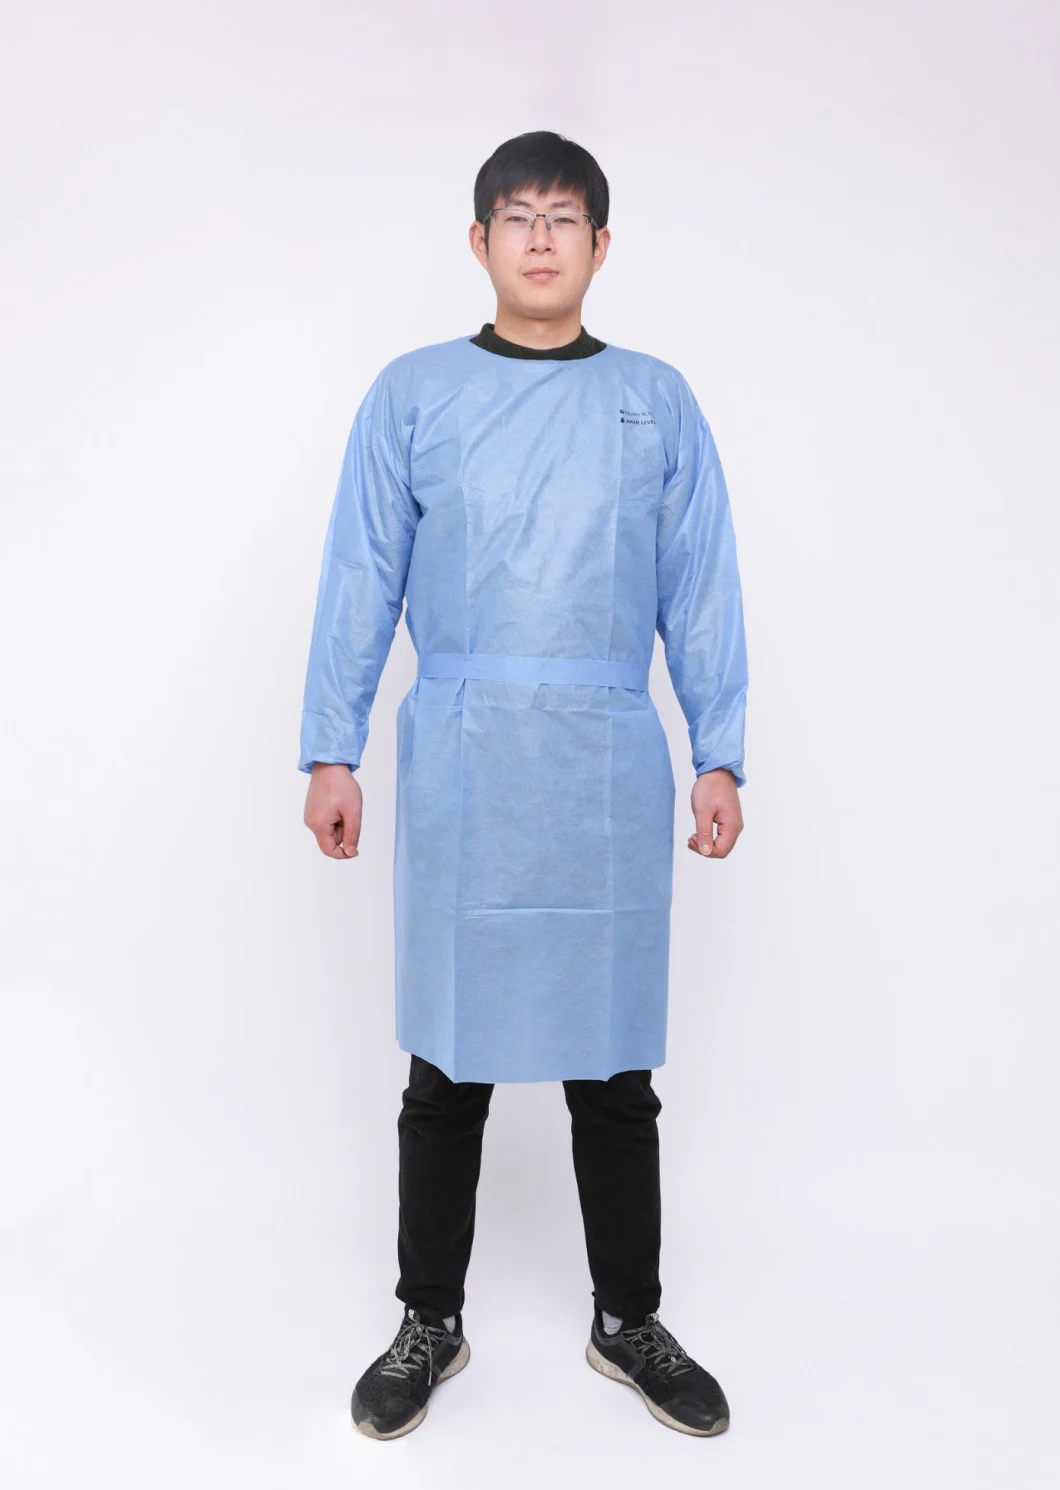 Non-Woven Cloth Safety Labor Surgical CE FDA Medcial II Disposable Medical Protective Suit Clothing